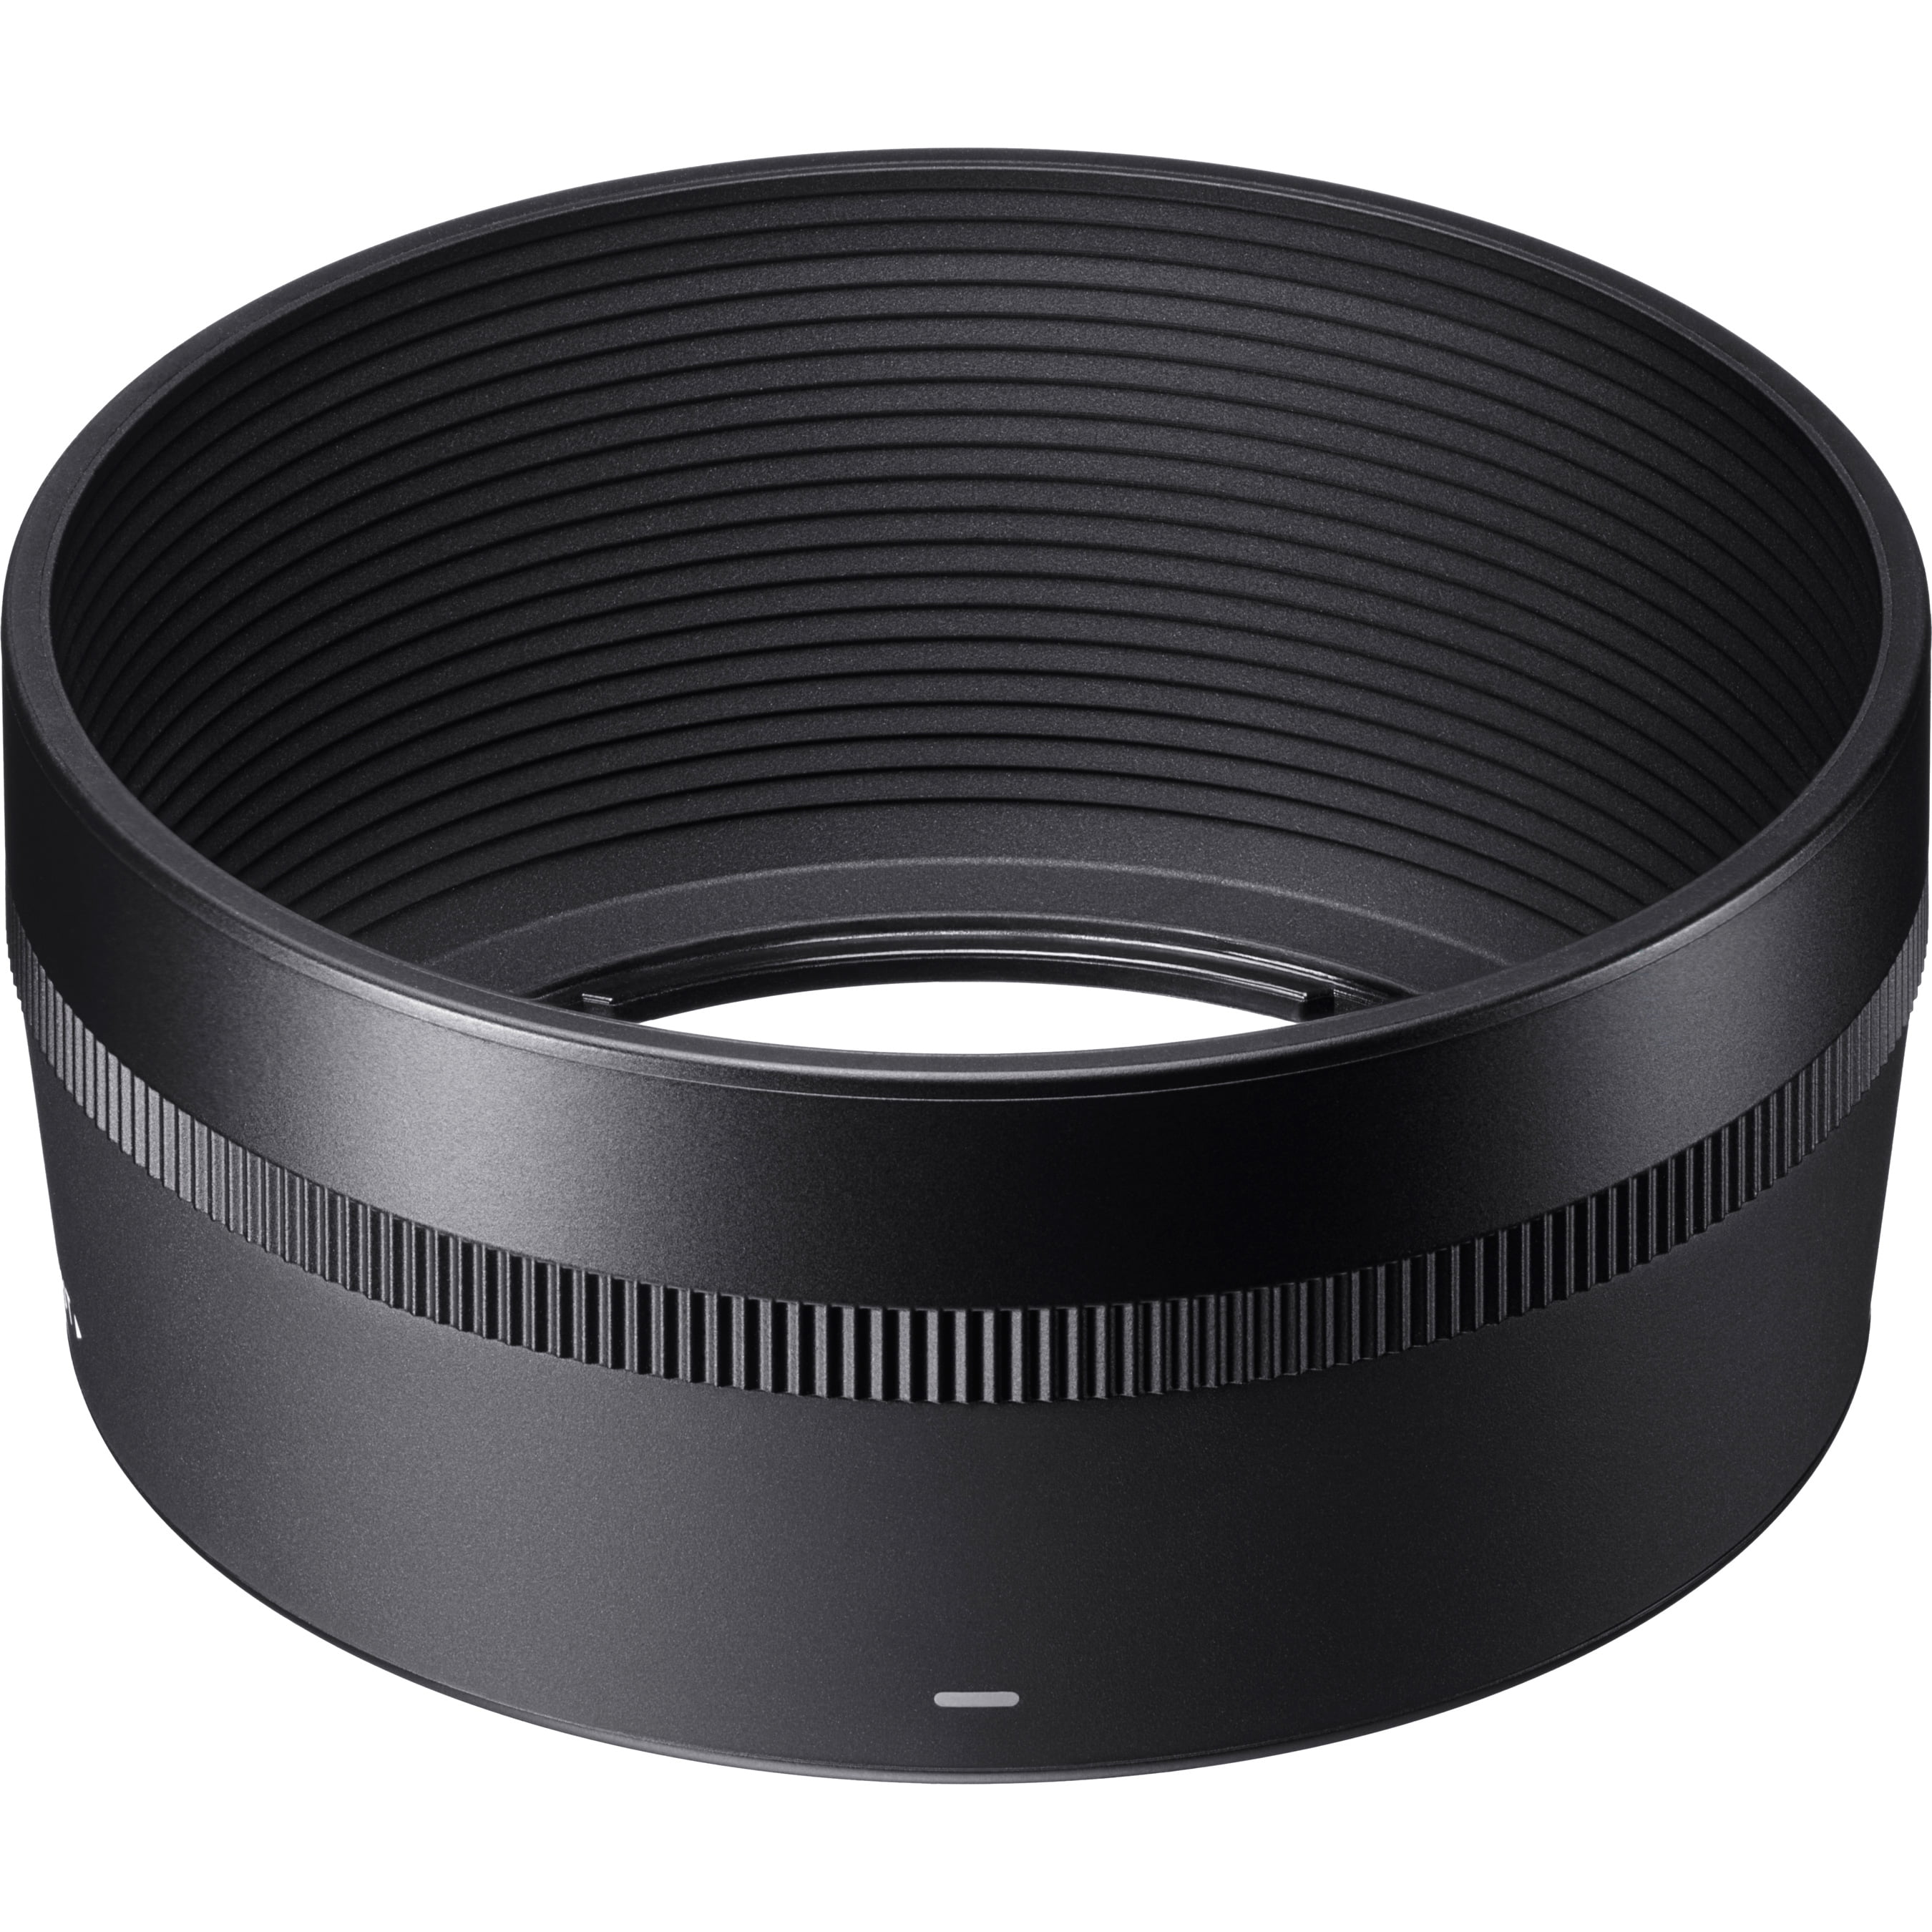 Sigma 30mm F1.4 DC DN Lens for Sony E Mount Includes Bonus Xit 60 